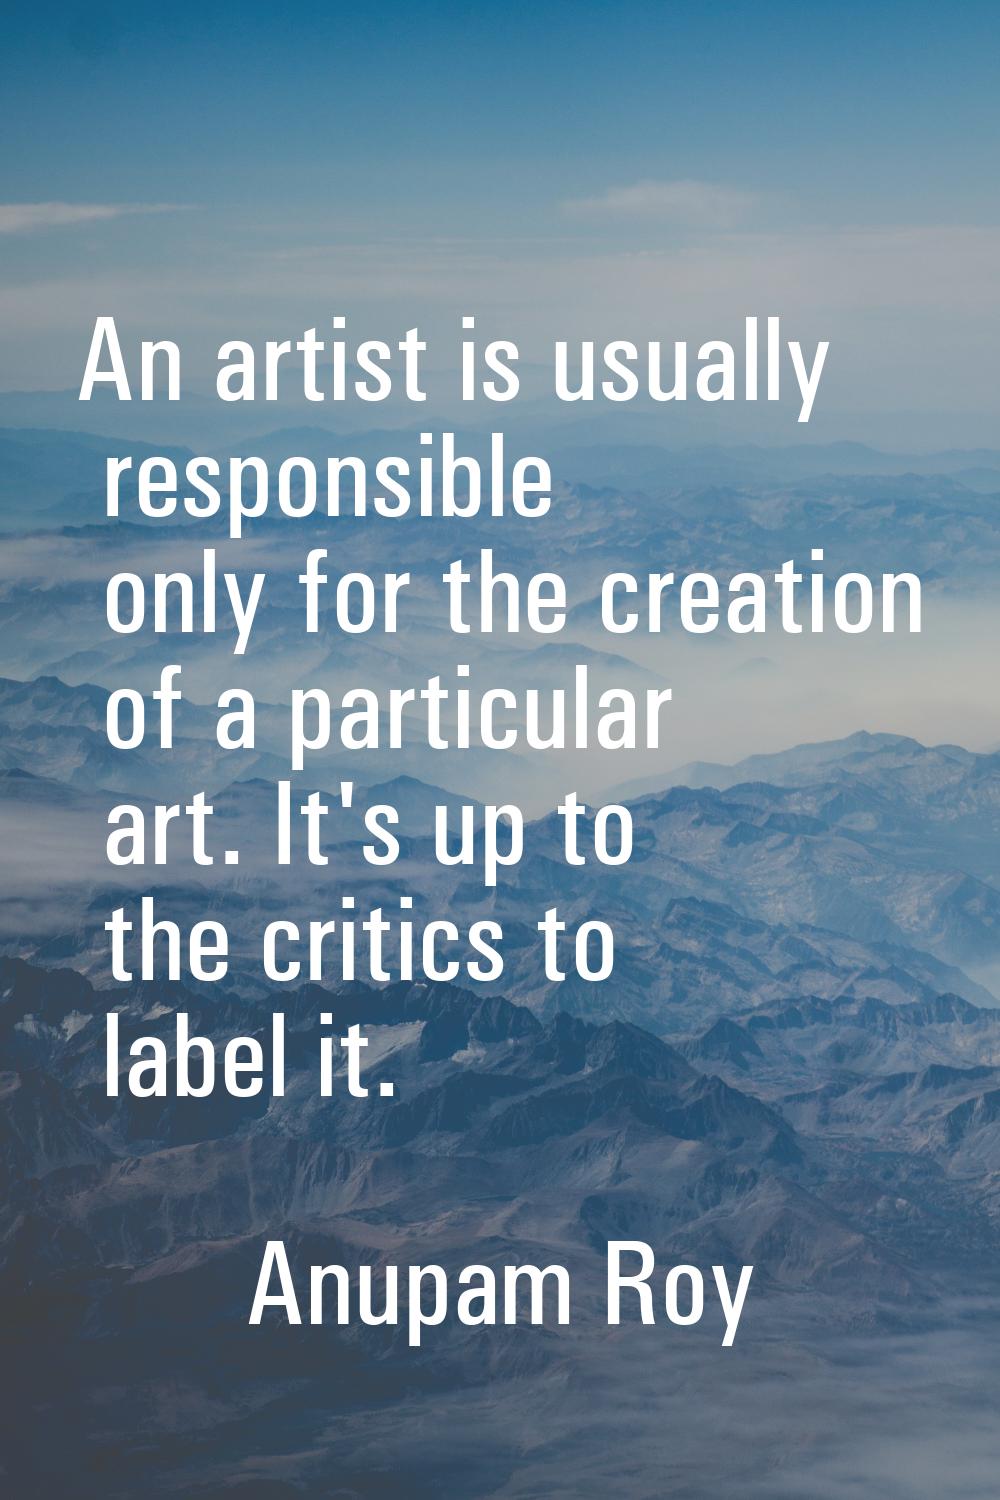 An artist is usually responsible only for the creation of a particular art. It's up to the critics 